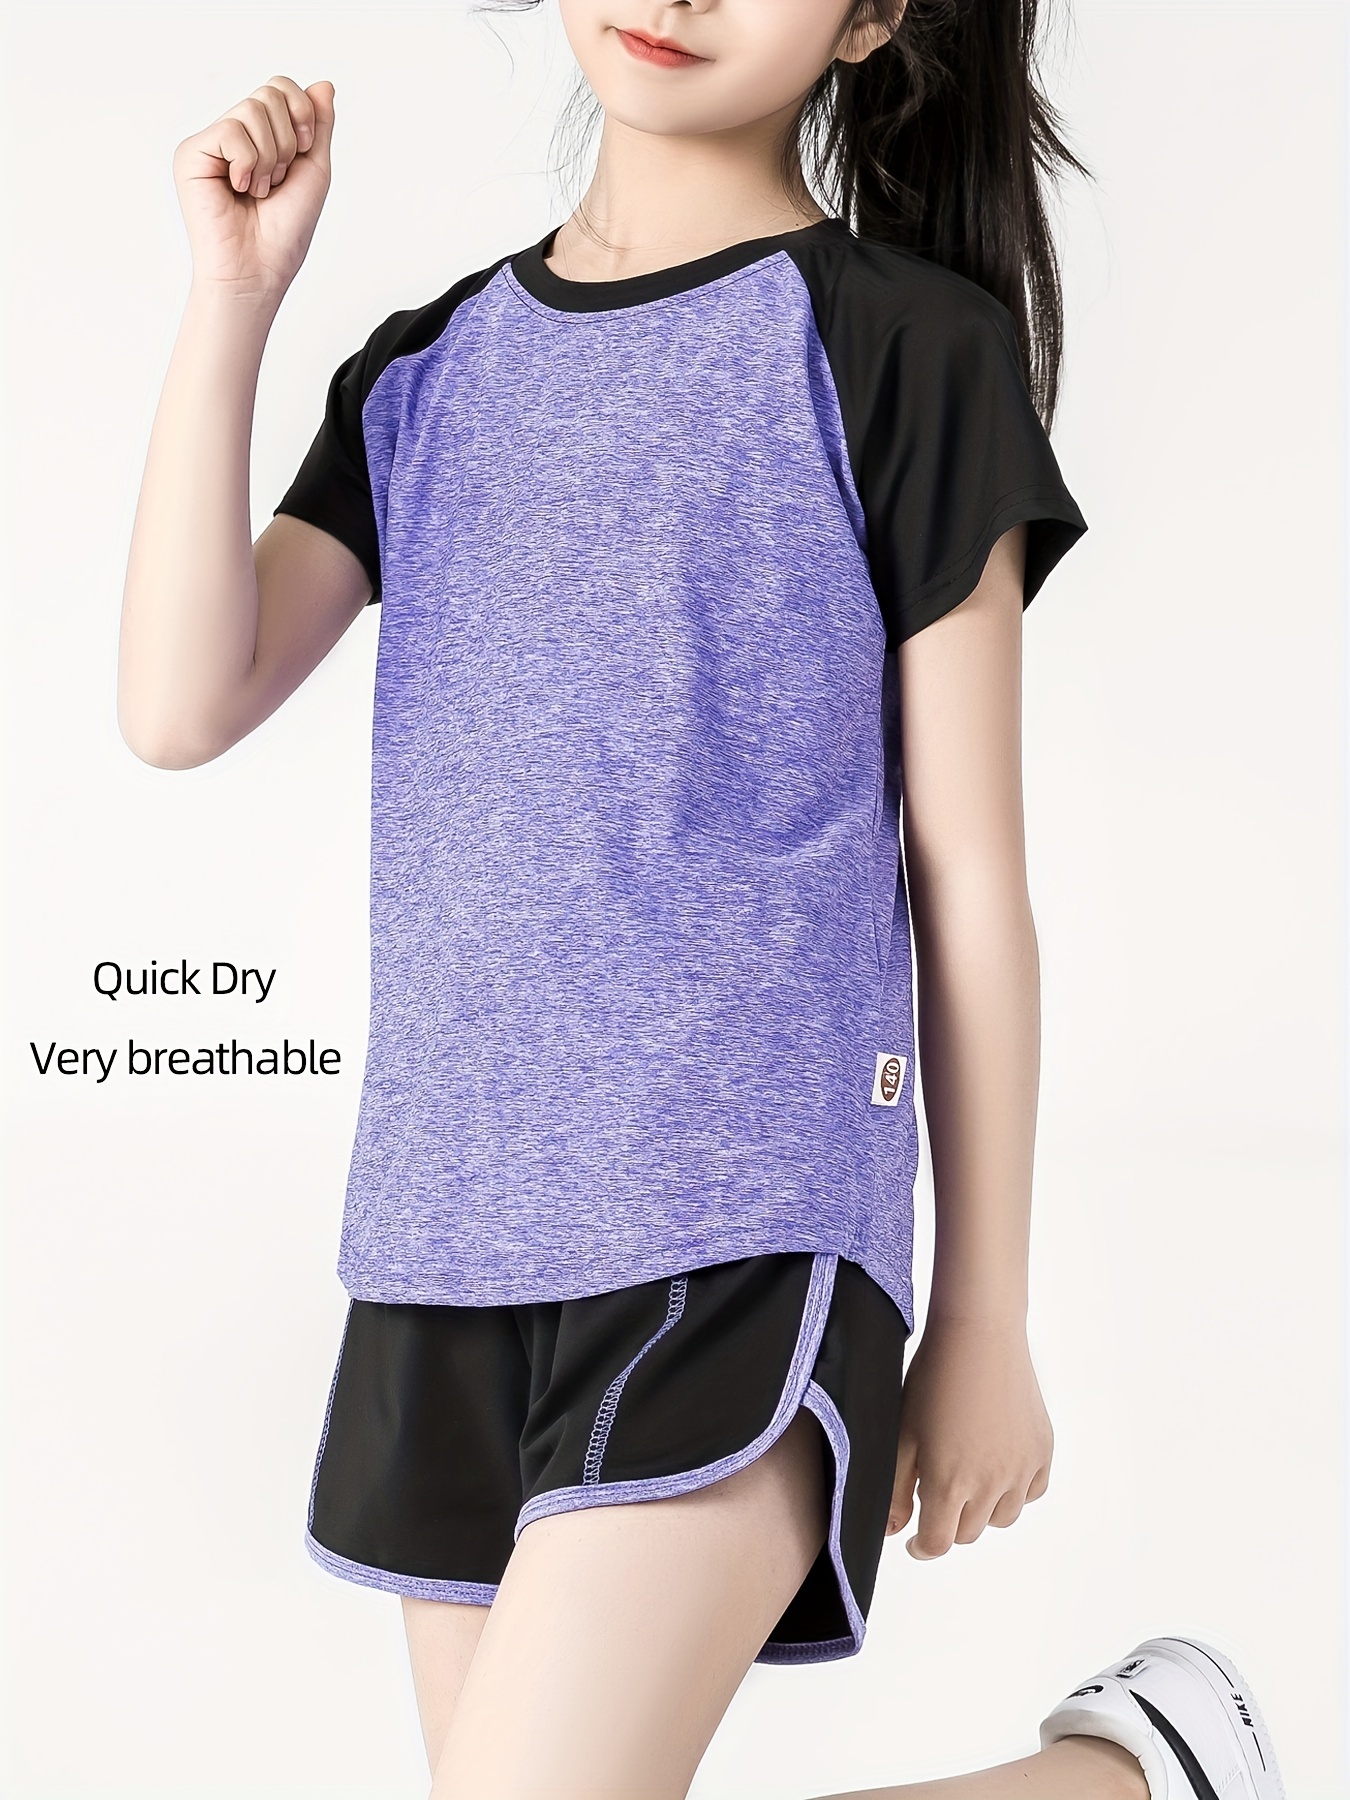 Teen Girls' Sportswear Set, Blue Contrast Color Sports Vest And